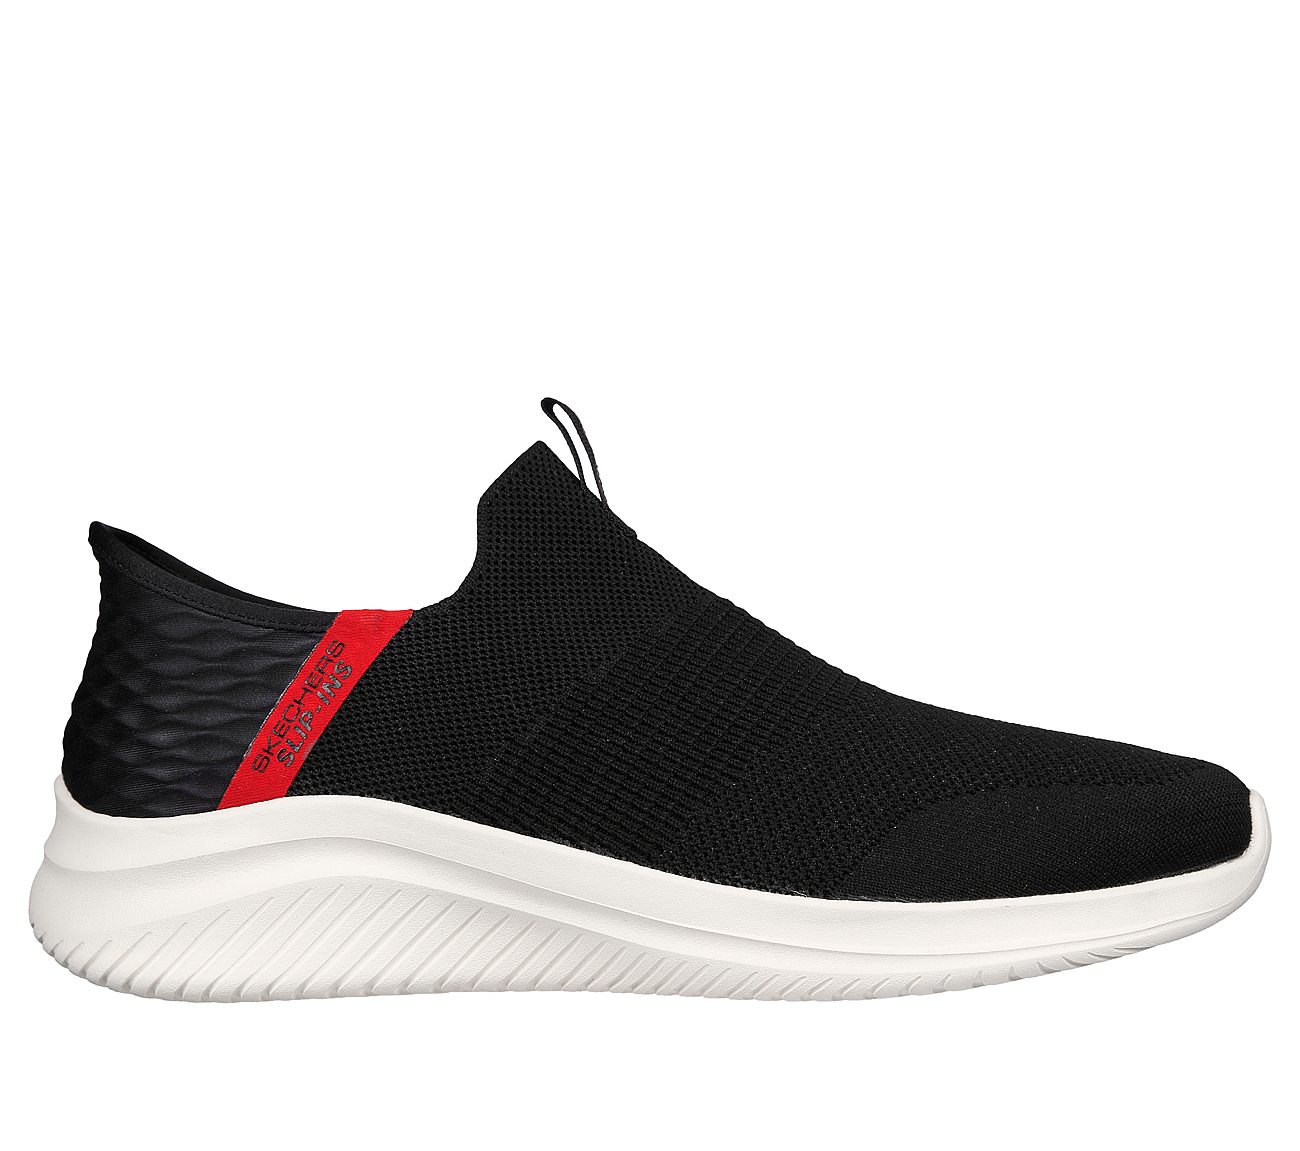 ULTRA FLEX 3.0 - VIEWPOINT, BLACK/RED Footwear Lateral View